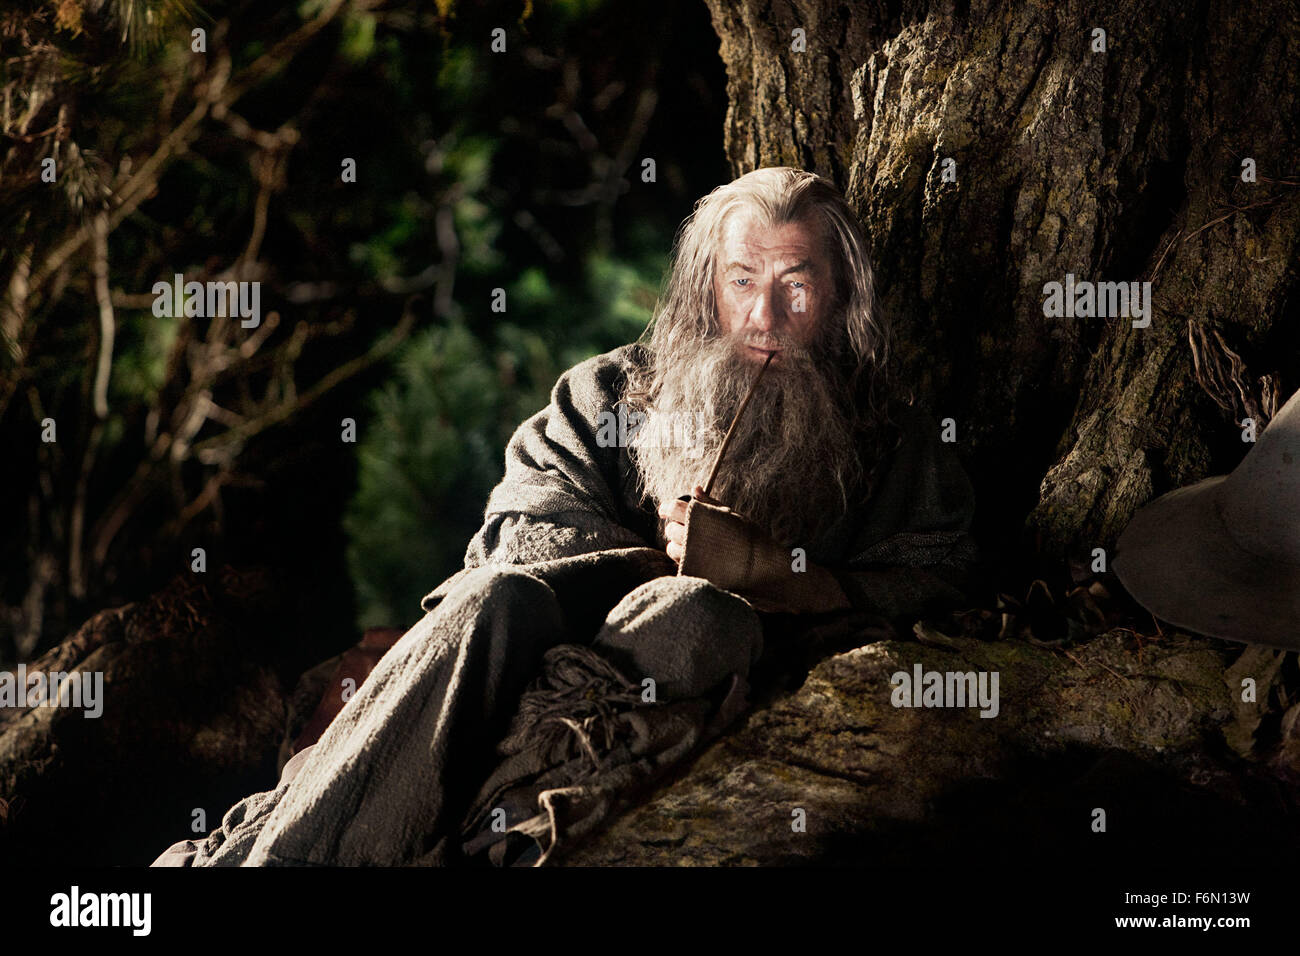 RELEASE DATE: December 14, 2012   TITLE: The Hobbit: An Unexpected Journey   STUDIO: New Line Cinema   DIRECTOR: Peter Jackson   PLOT: Bilbo Baggins, a Hobbit, journeys to the Lonely Mountain accompanied by a group of dwarves to reclaim a treasure taken from them by the dragon Smaug   PICTURED: IAN MCKELLEN as Gandalf   (Credit Image: c New Line Cinema/Entertainment Pictures) Stock Photo